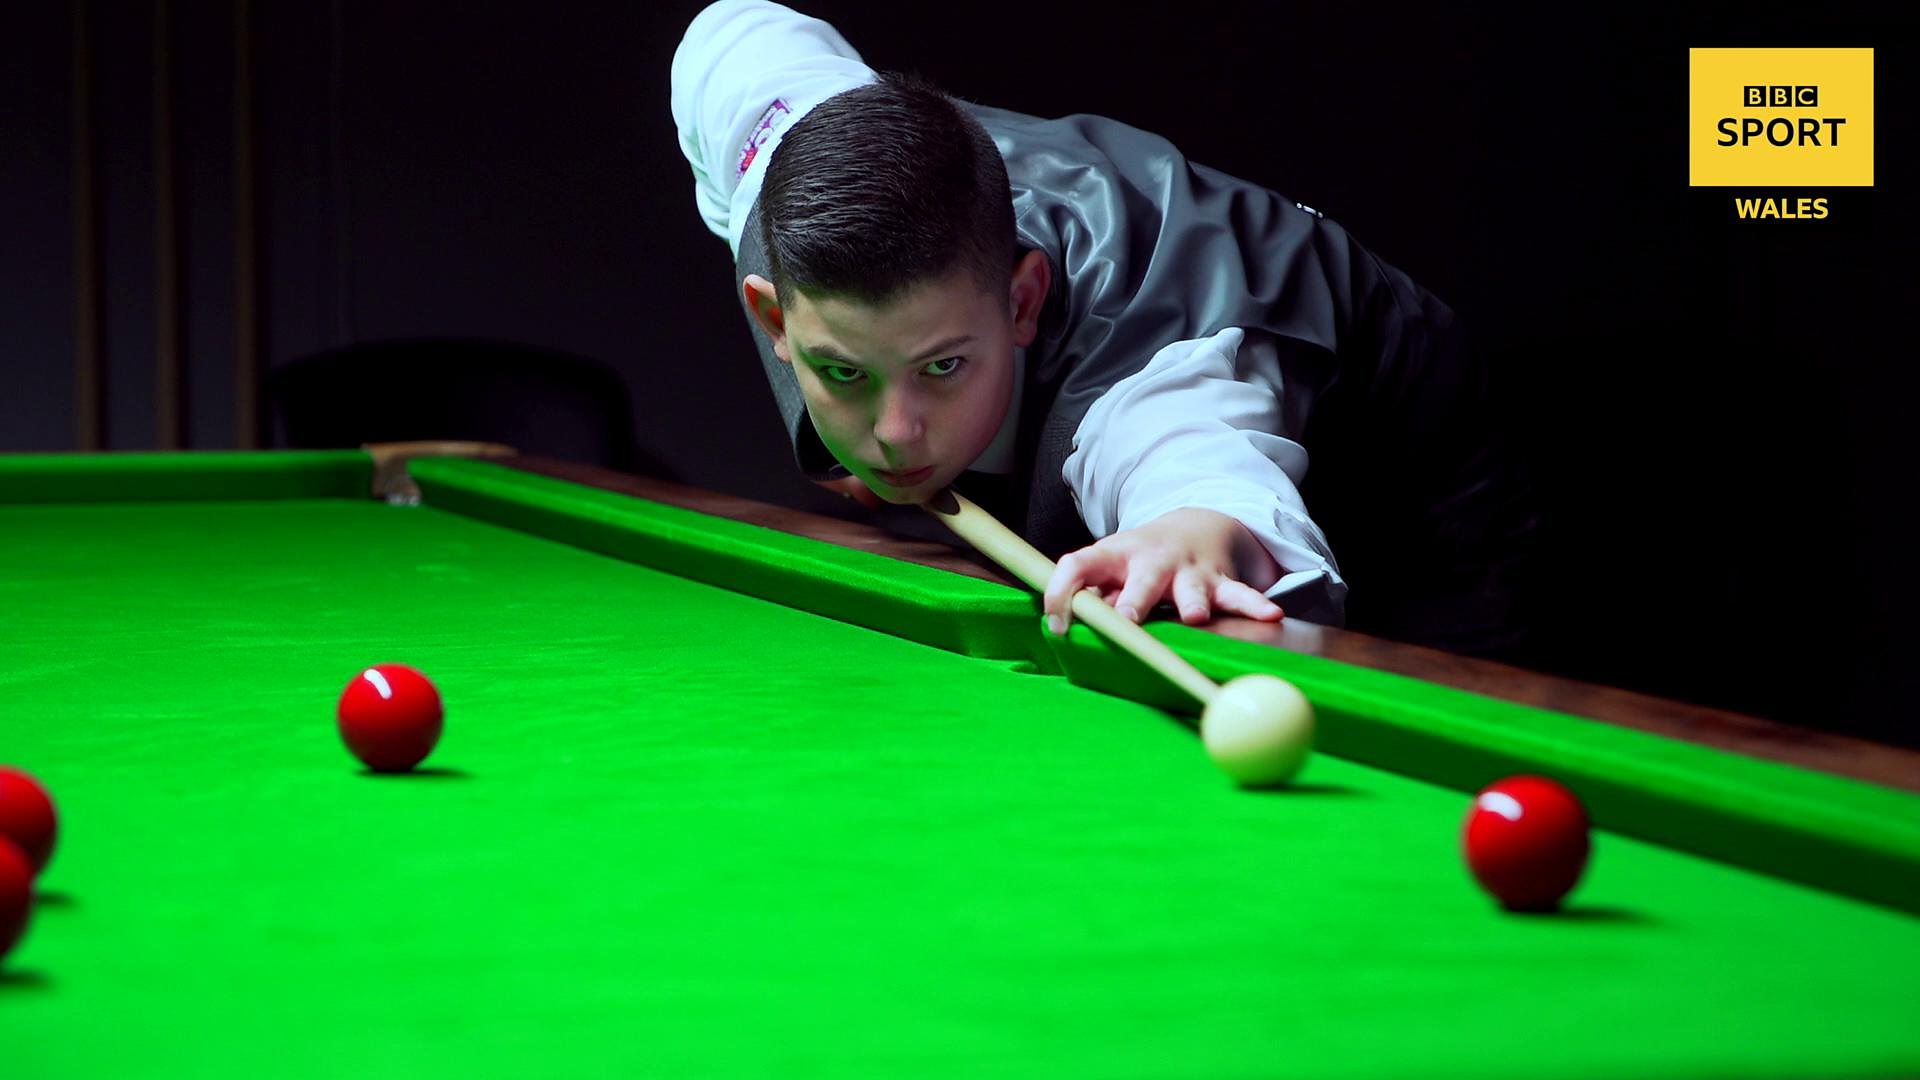 Liam Davies, 13, is aiming to break onto snookers pro circuit